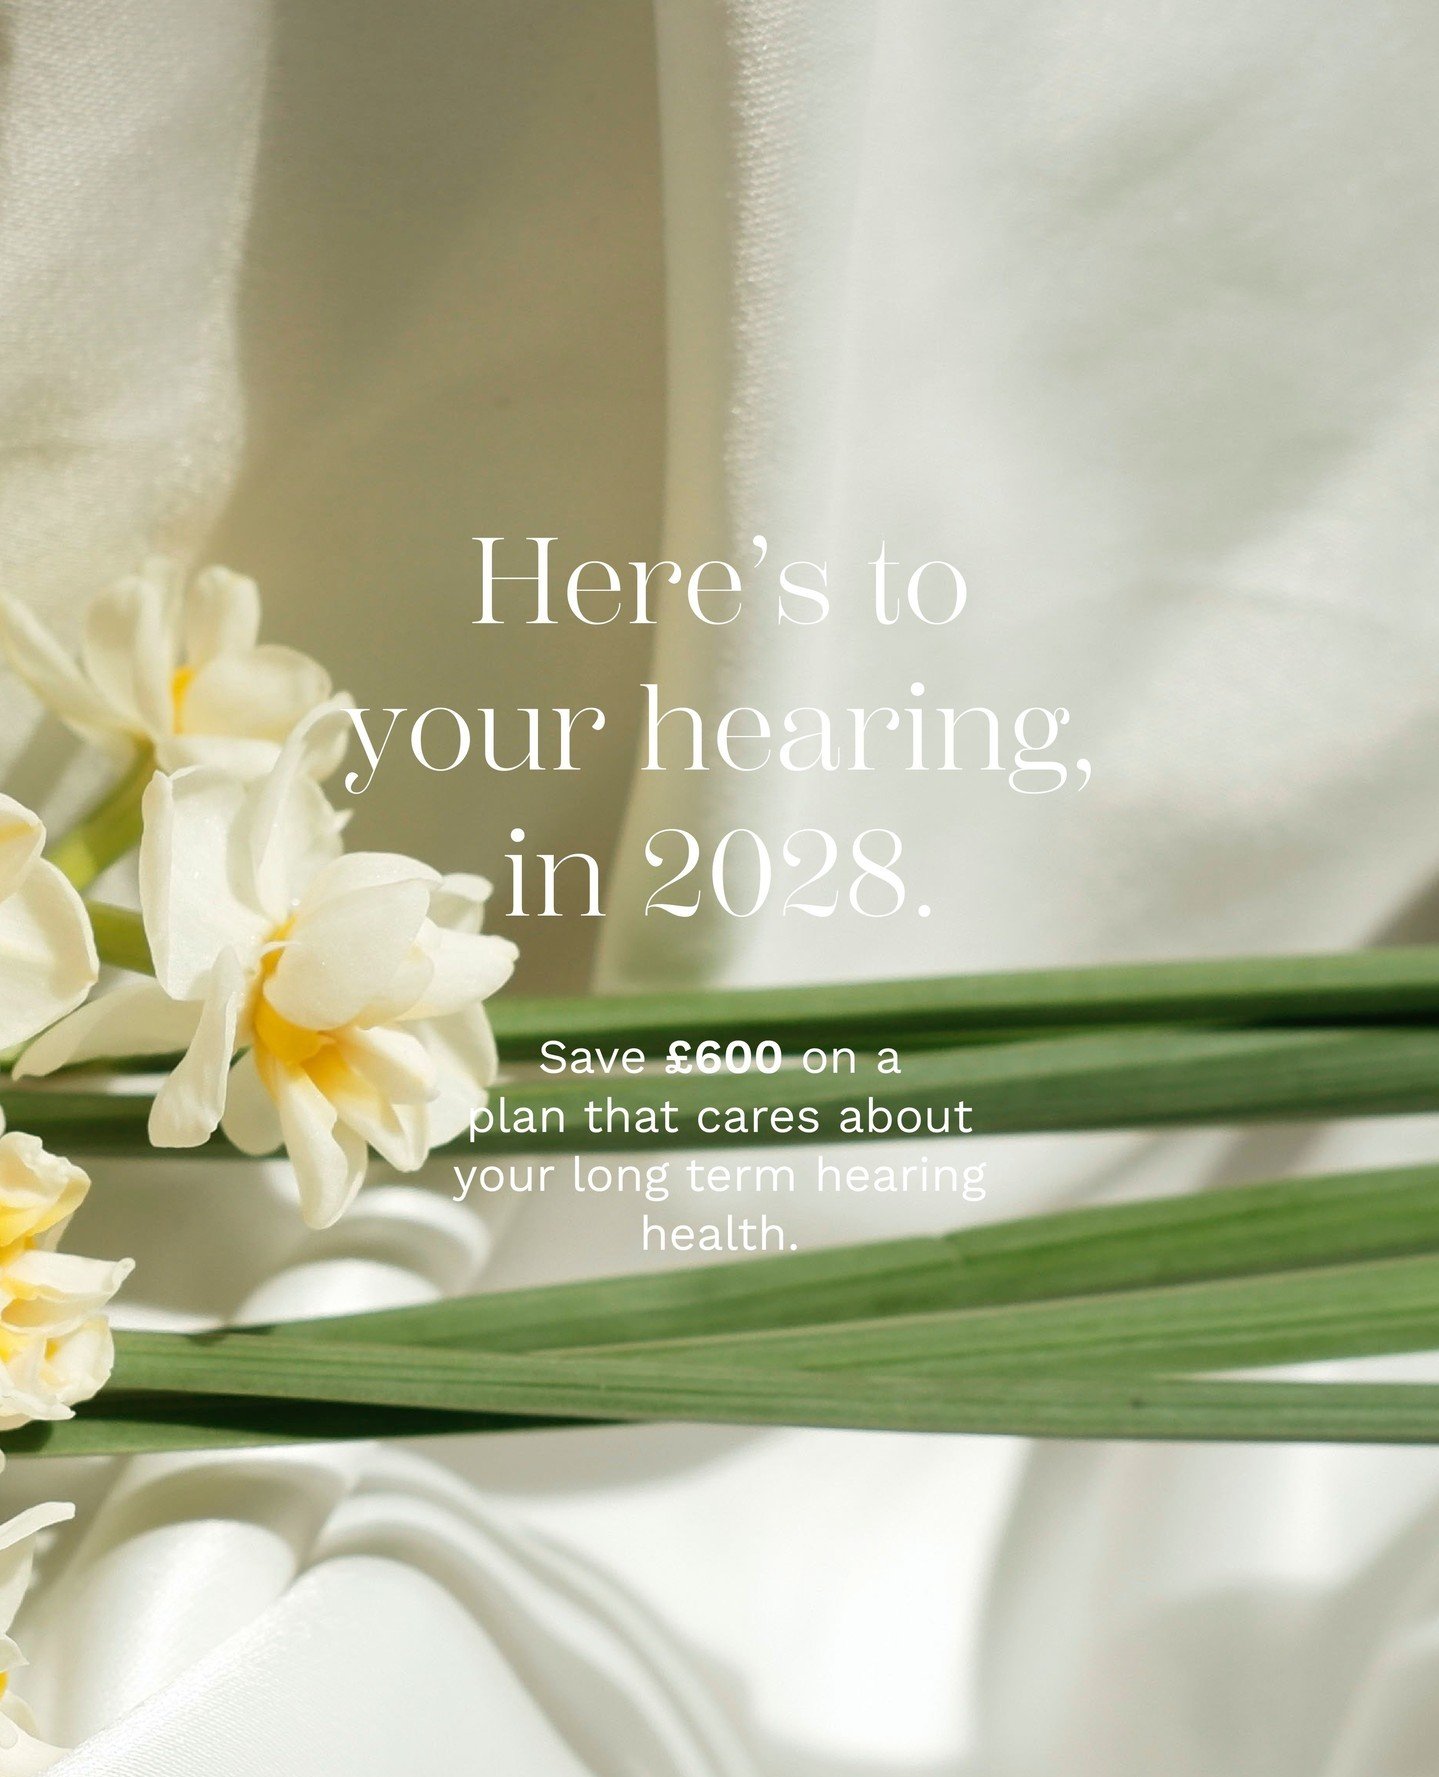 Here&rsquo;s to your hearing, in 2028. Save &pound;600 on a plan that cares about your long term hearing health. See link in bio for more.